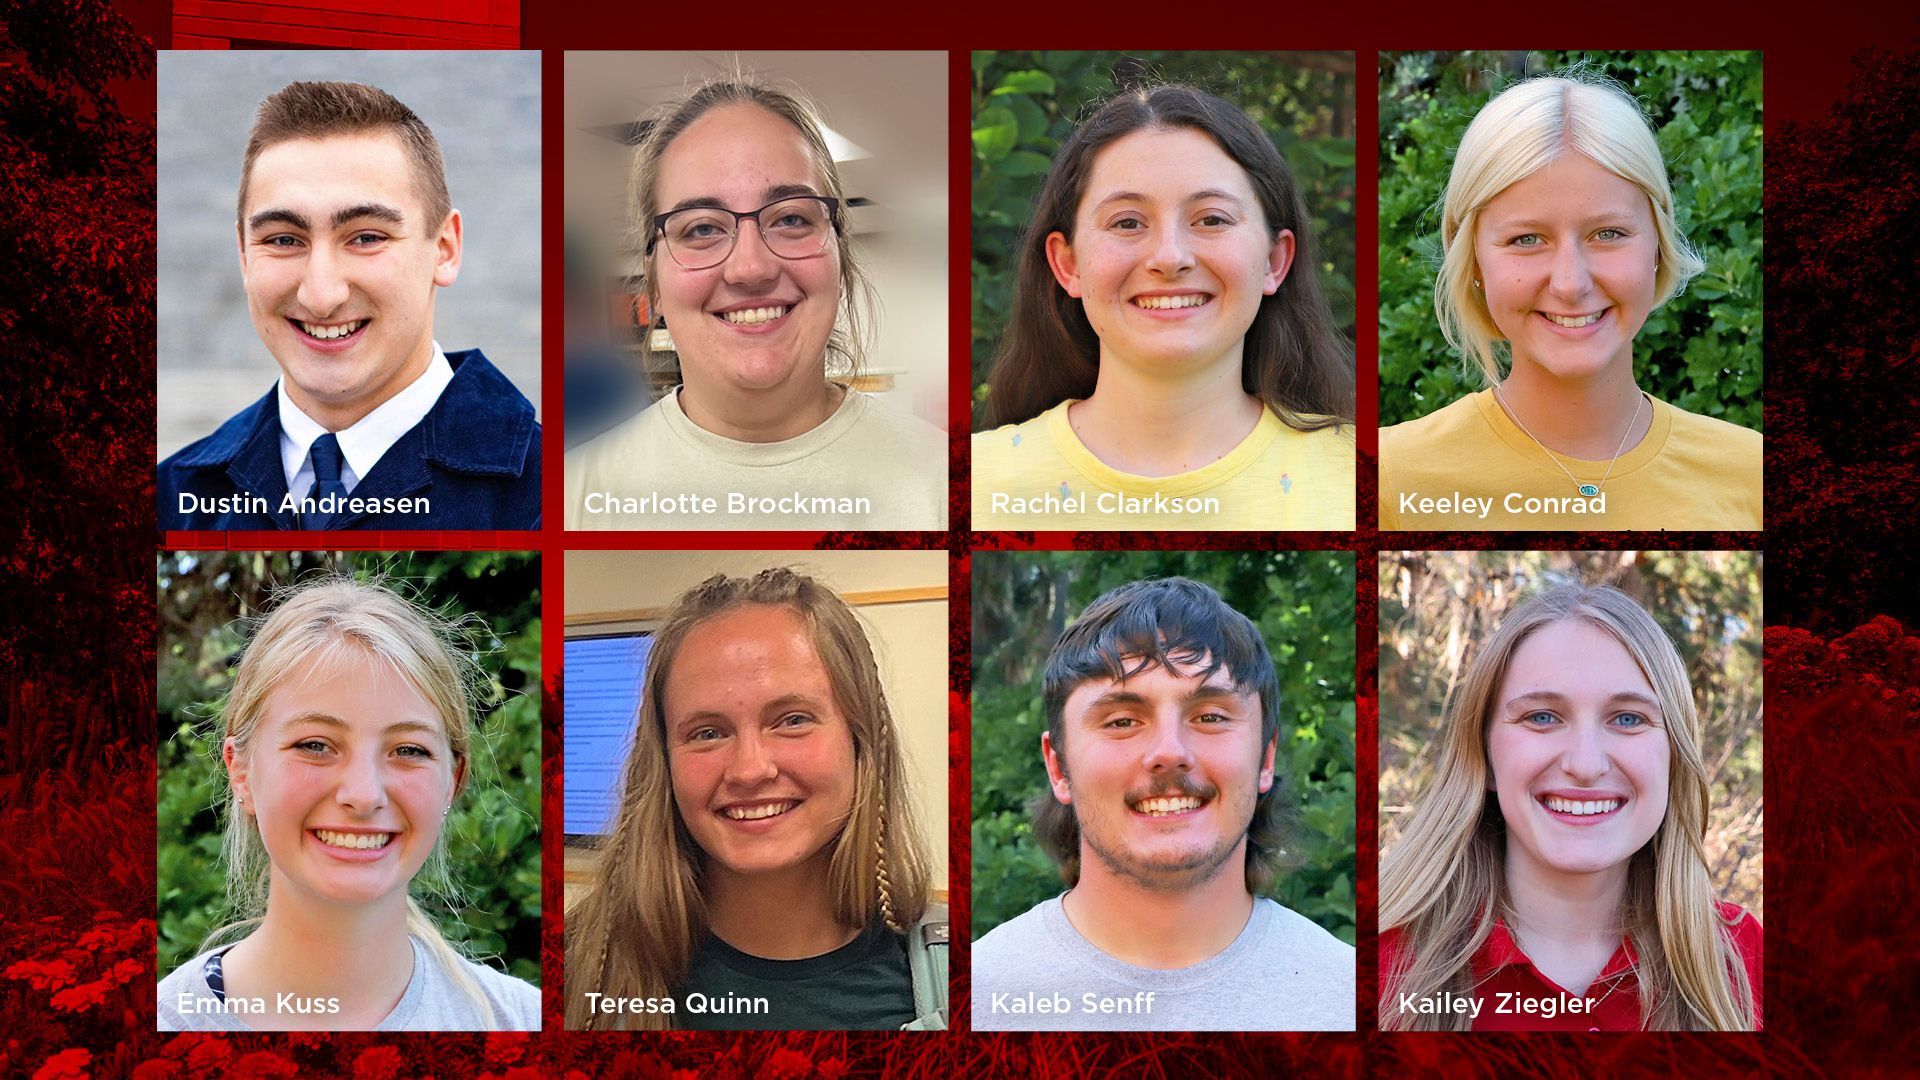 Six University of Nebraska–Lincoln plant and landscape systems majors are recipients of a one-time Engler Agribusiness Entrepreneurship Program scholarship for this academic year.